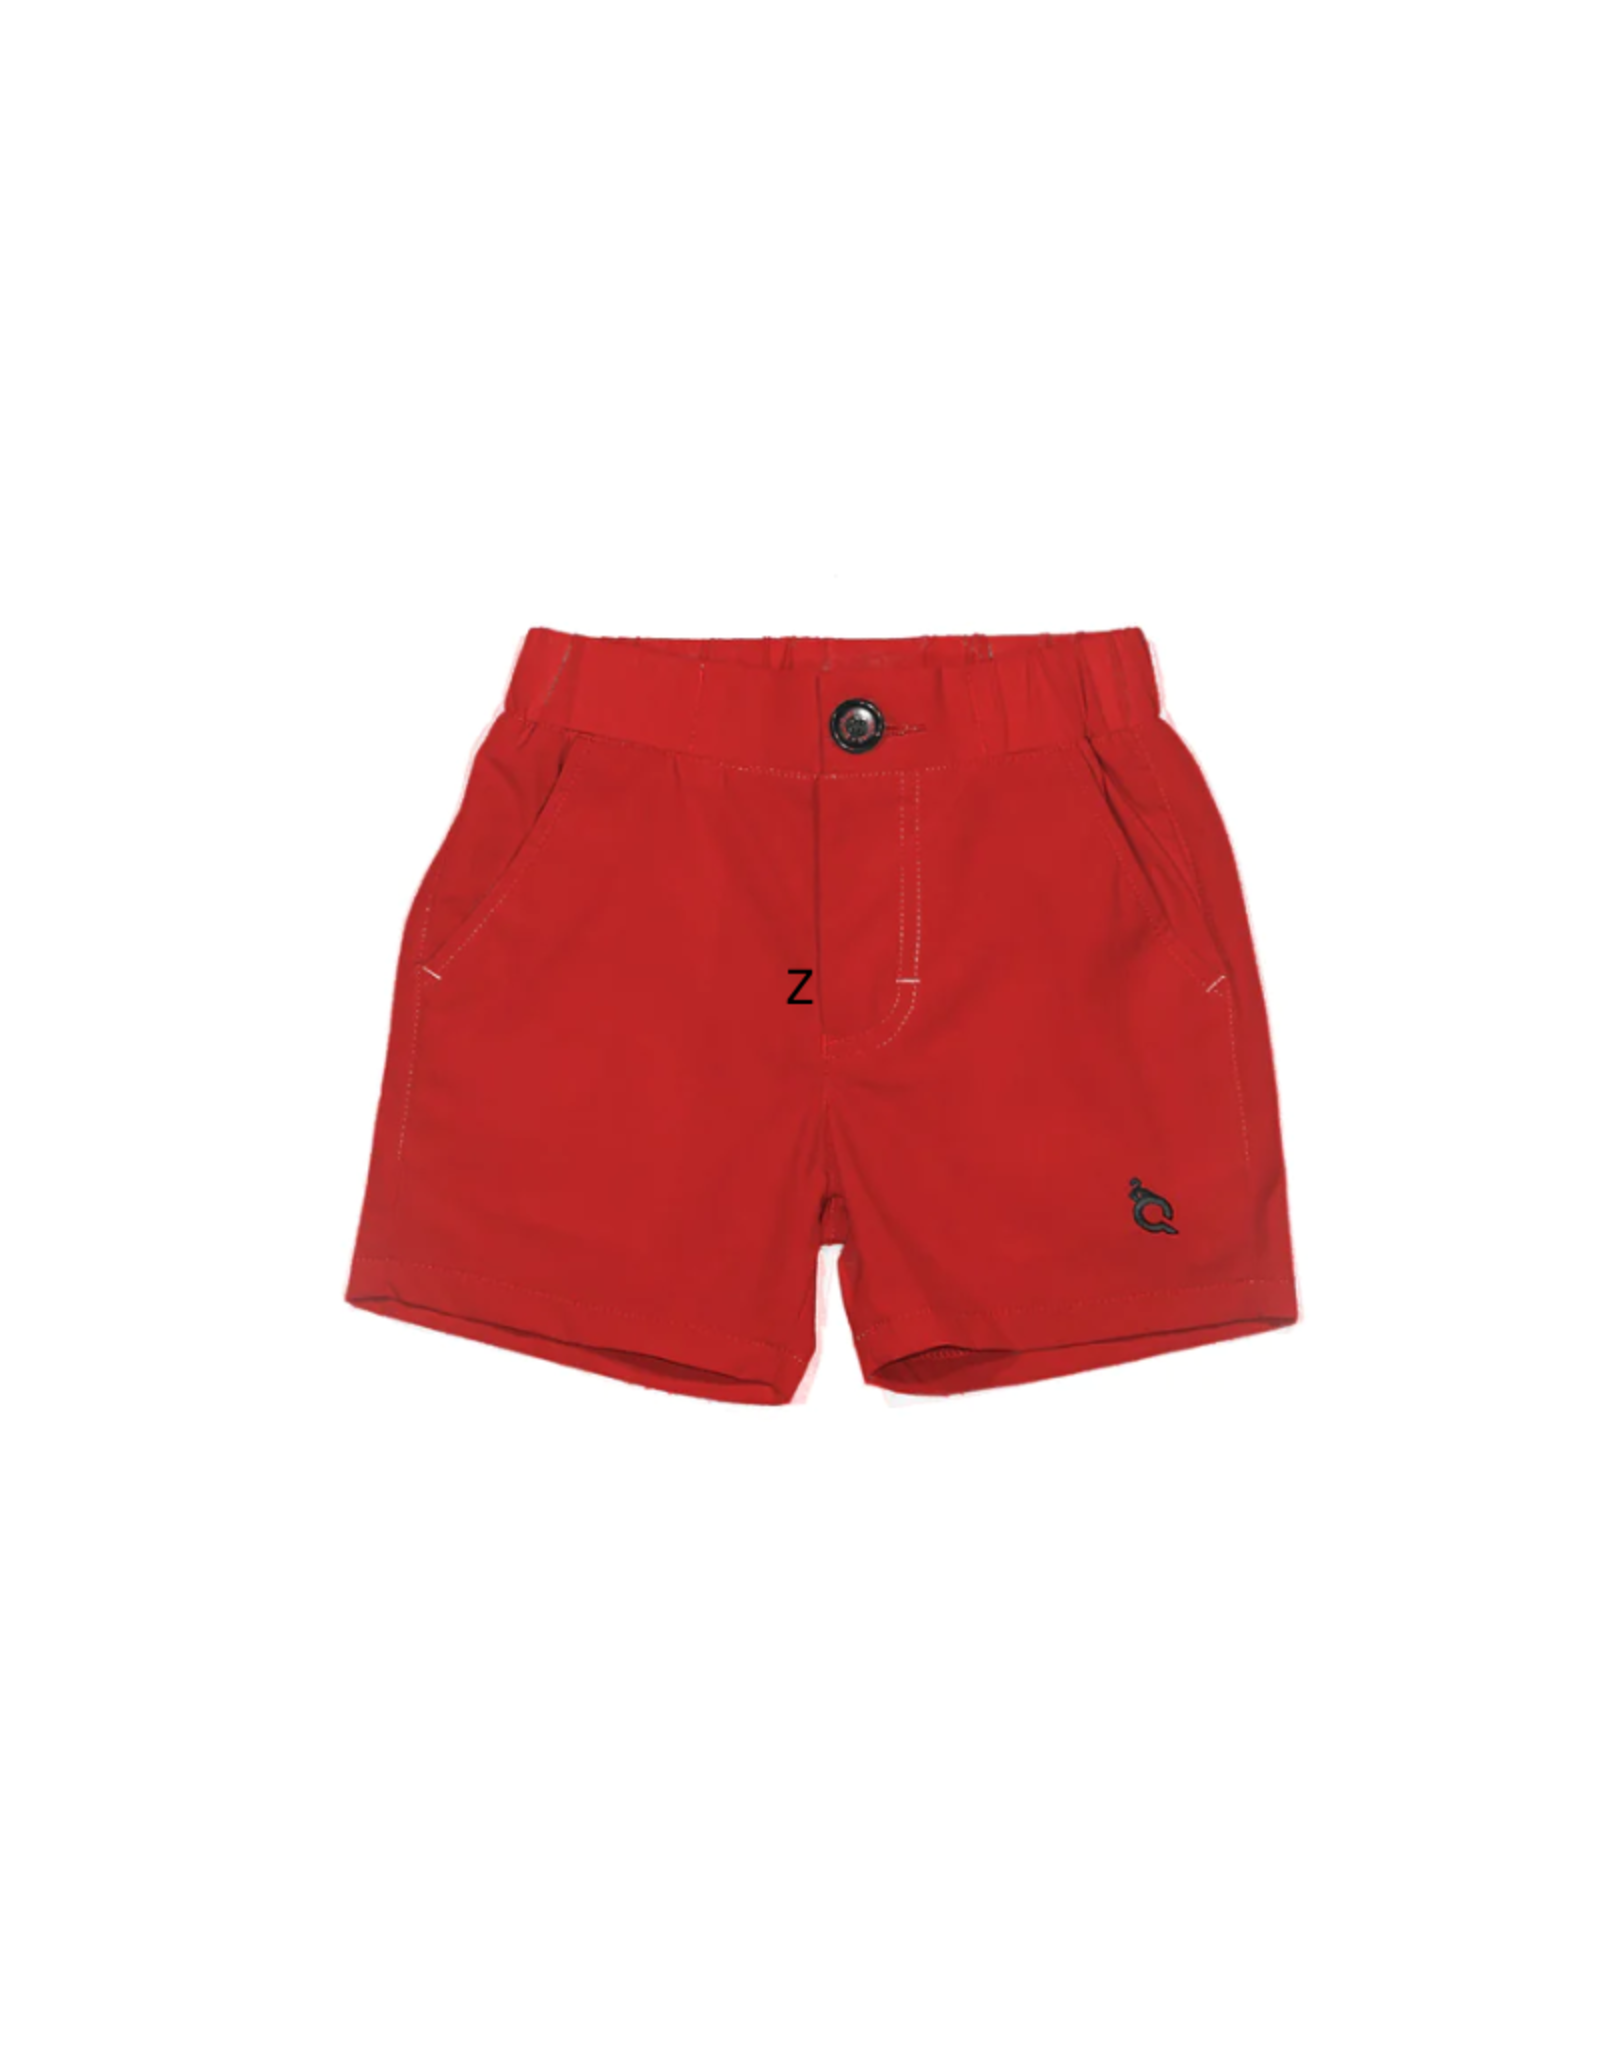 BlueQuail Clothing Co. Everyday Collection Red Shorts